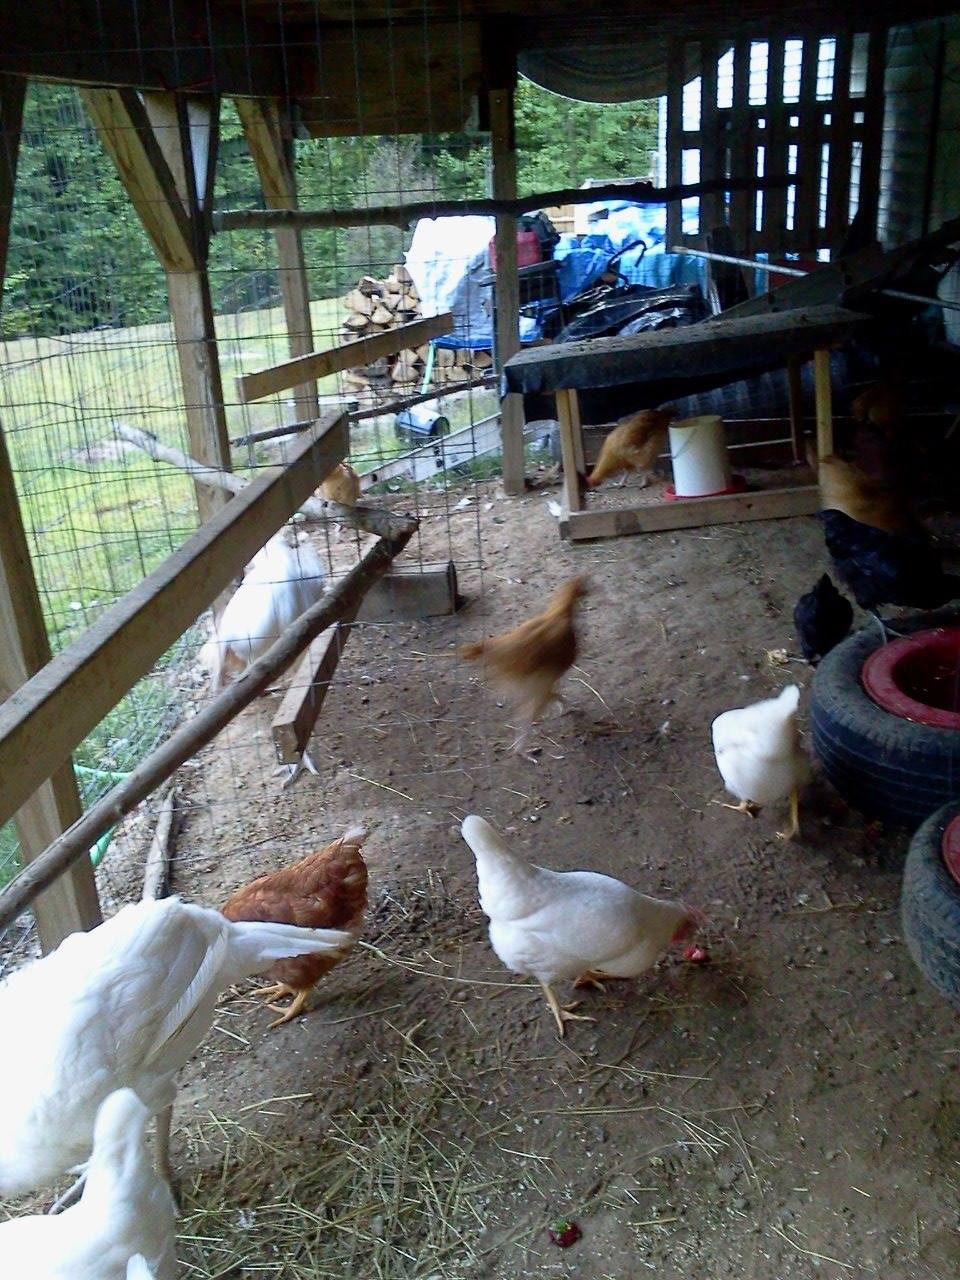 *
There are two turkeys in there that we raised for food. Our chickens will never be slaughtered.